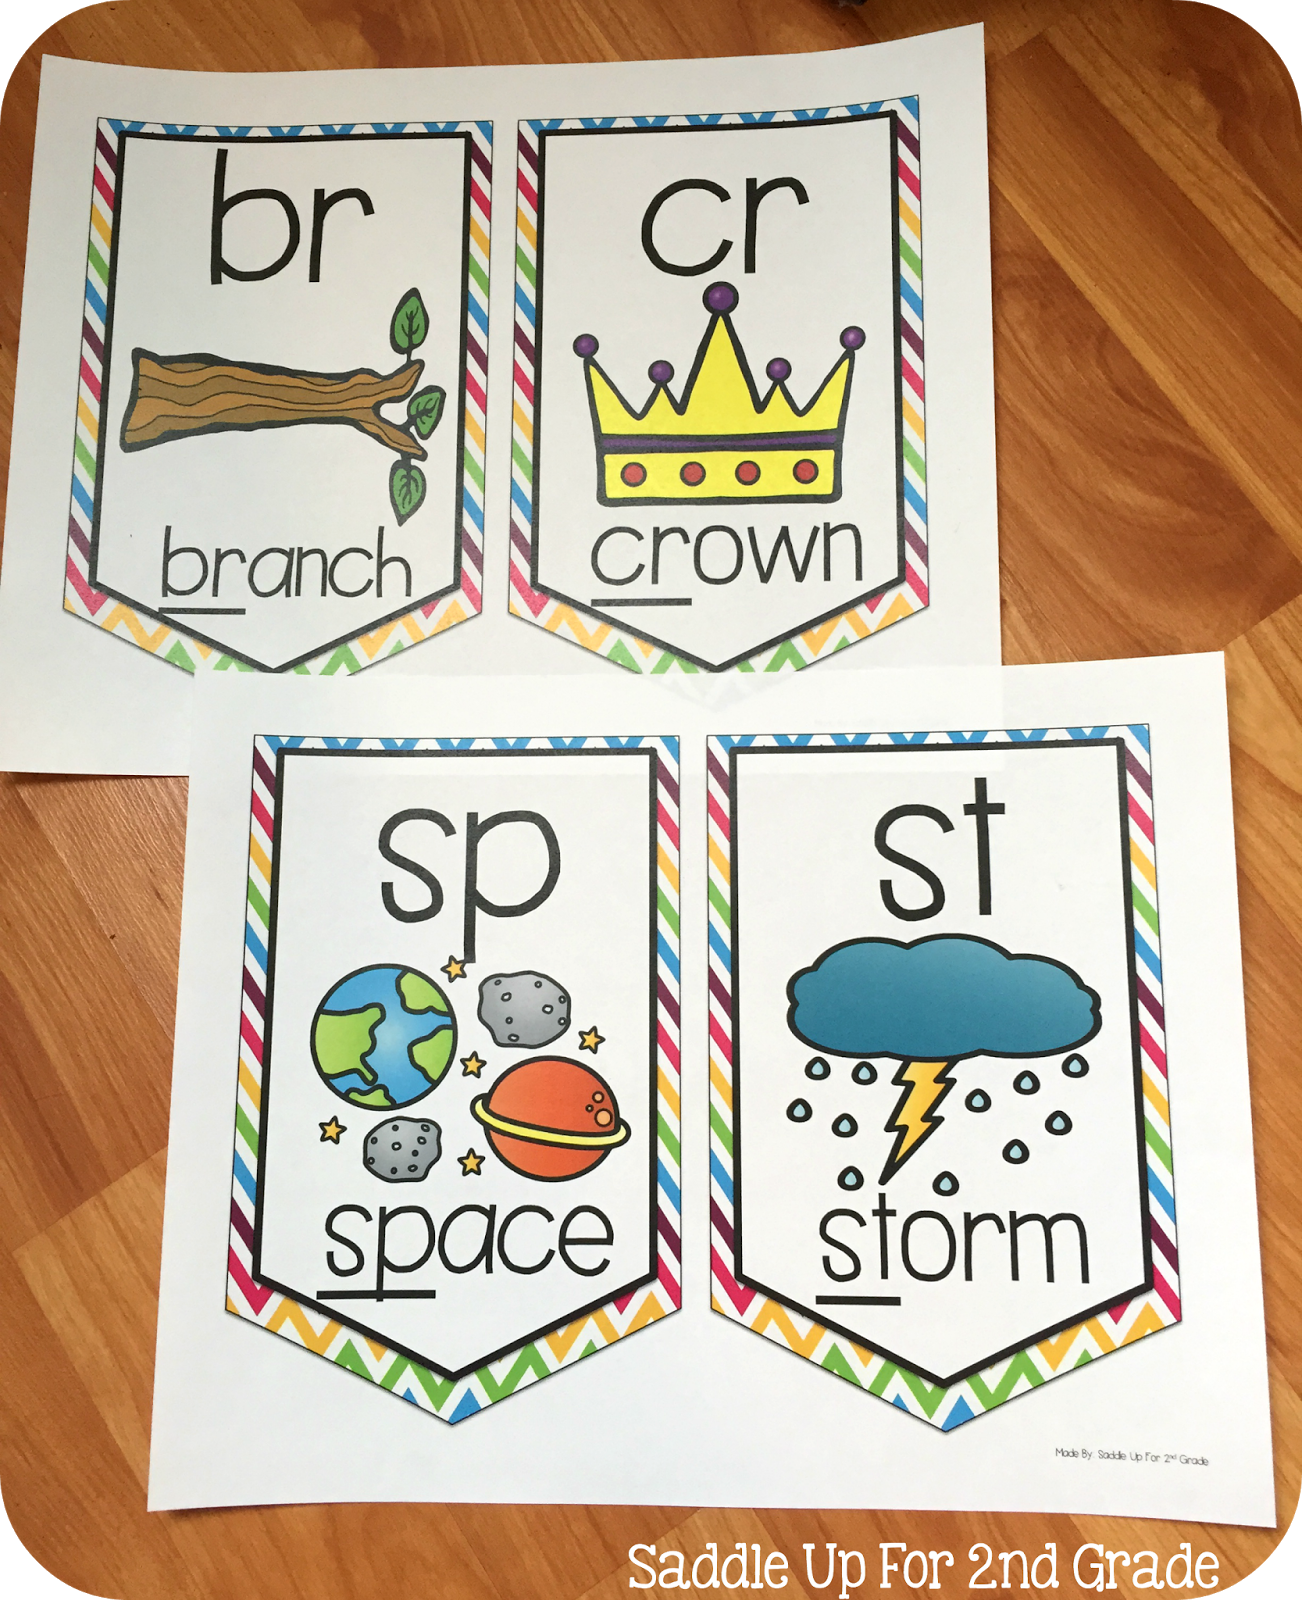 Chevron Bright Phonics Pennants by Saddle Up For 2nd Grade